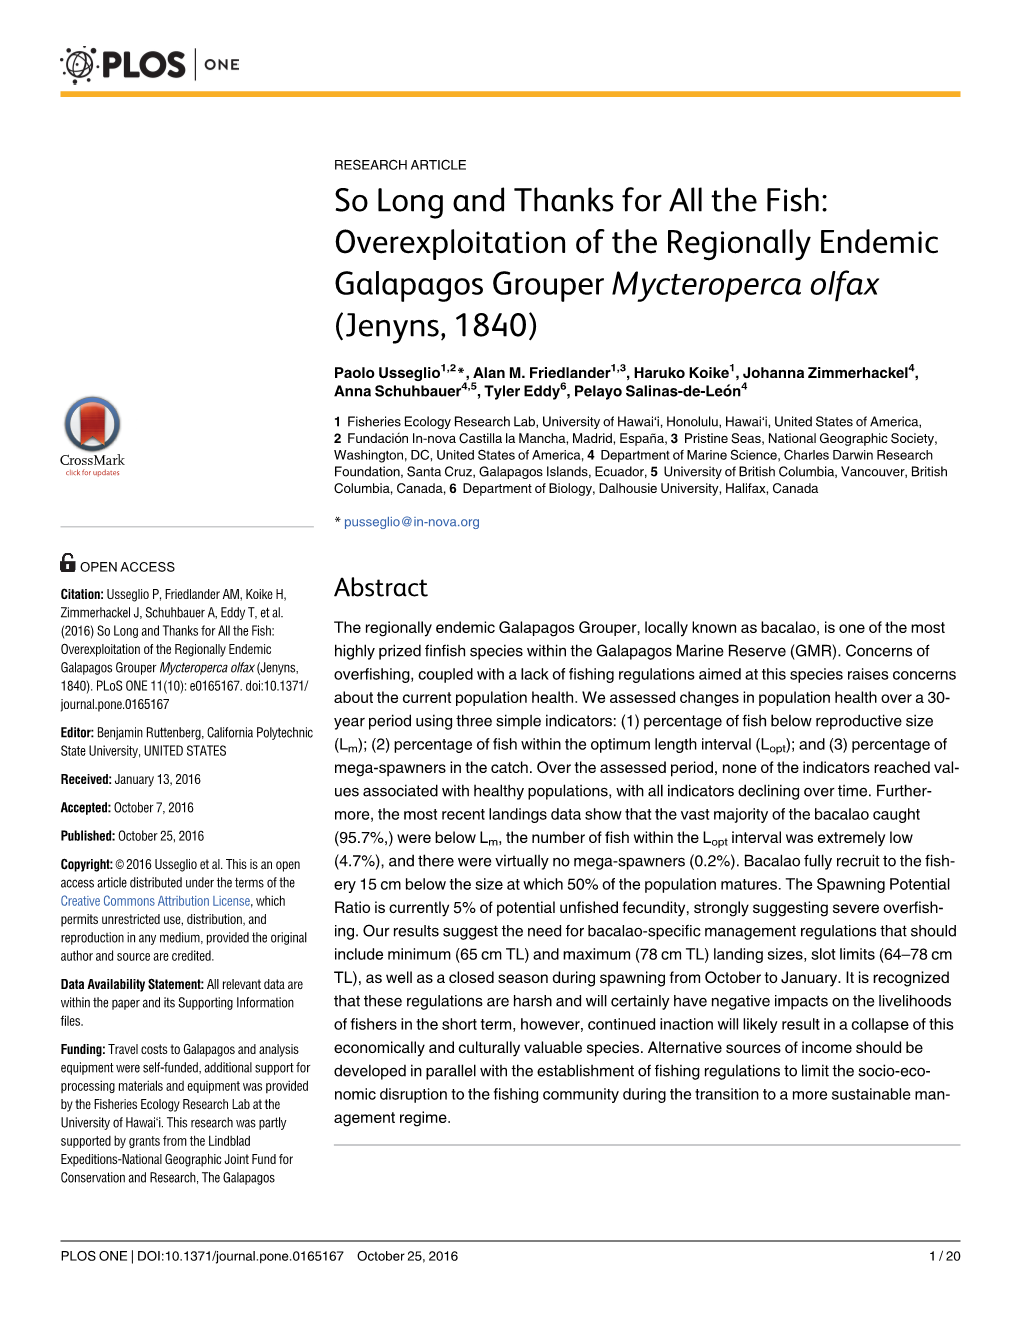 So Long and Thanks for All the Fish: Overexploitation of the Regionally Endemic Galapagos Grouper Mycteroperca Olfax (Jenyns, 1840)